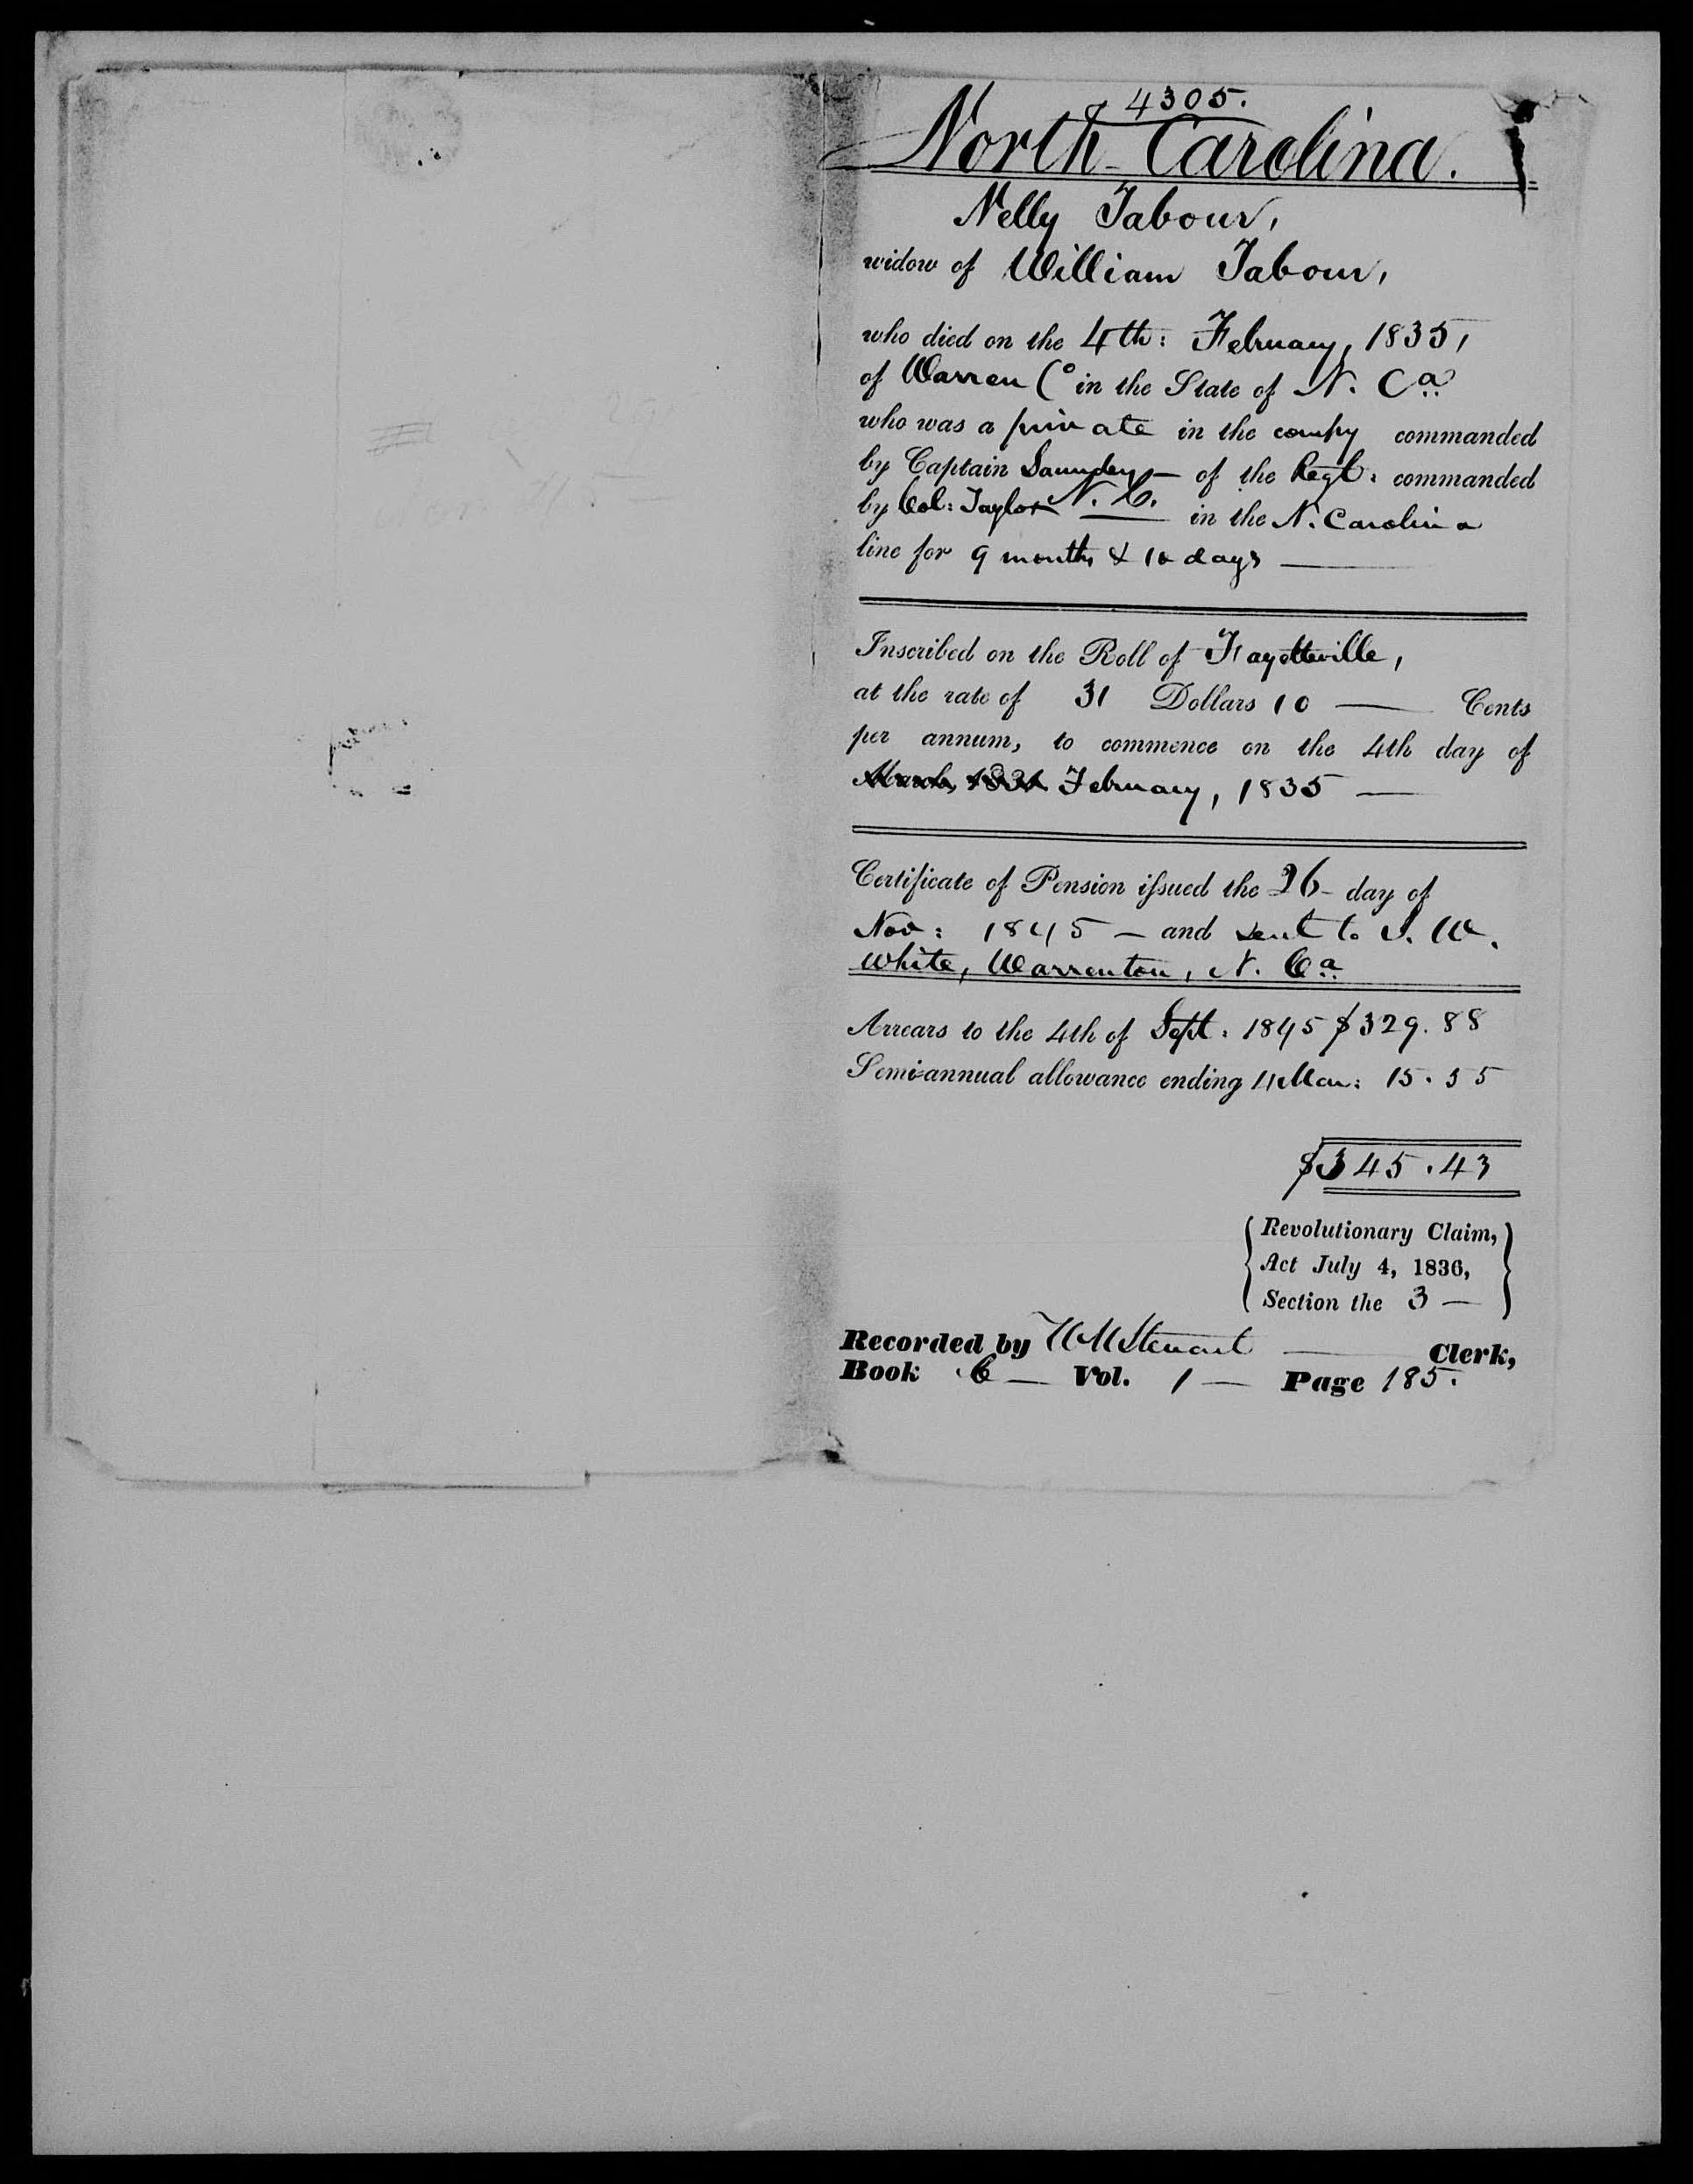 Docket for Pension from the U.S. Pension Office for Nelly Taburn, 26 November 1845